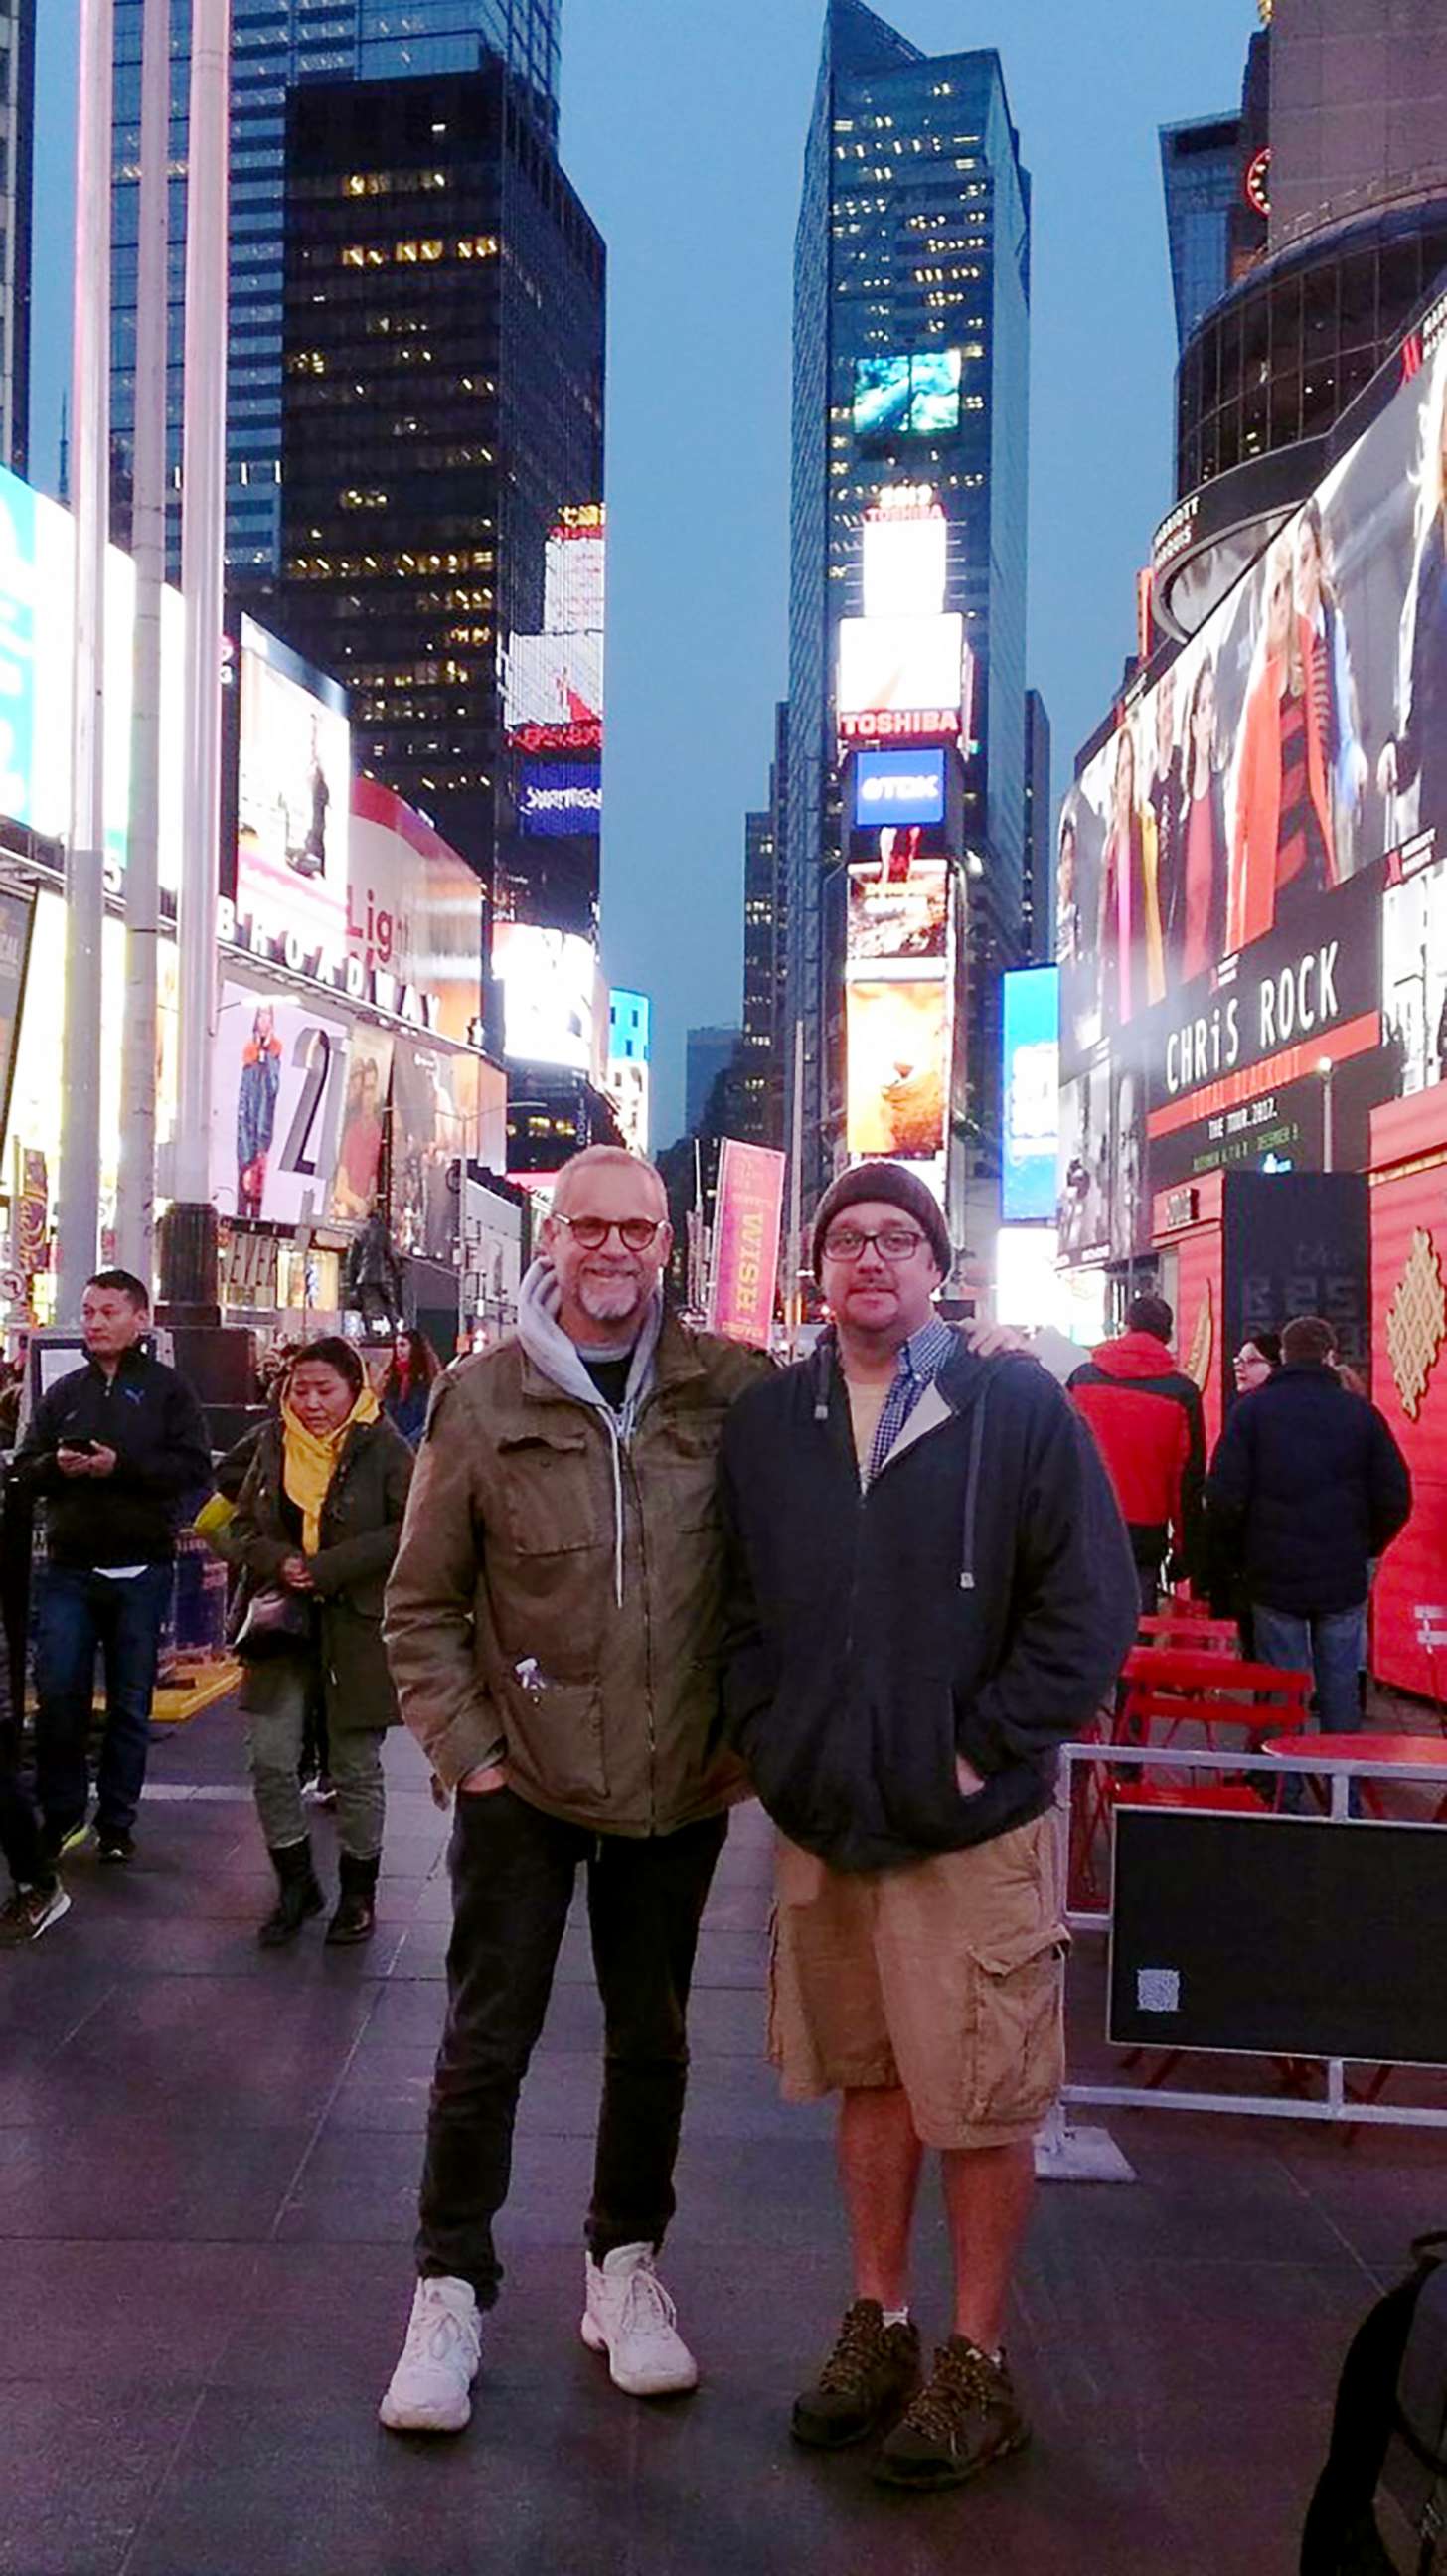 PHOTO: Robert Leibowitz and his kidney donor Richie Sully in Times Square.